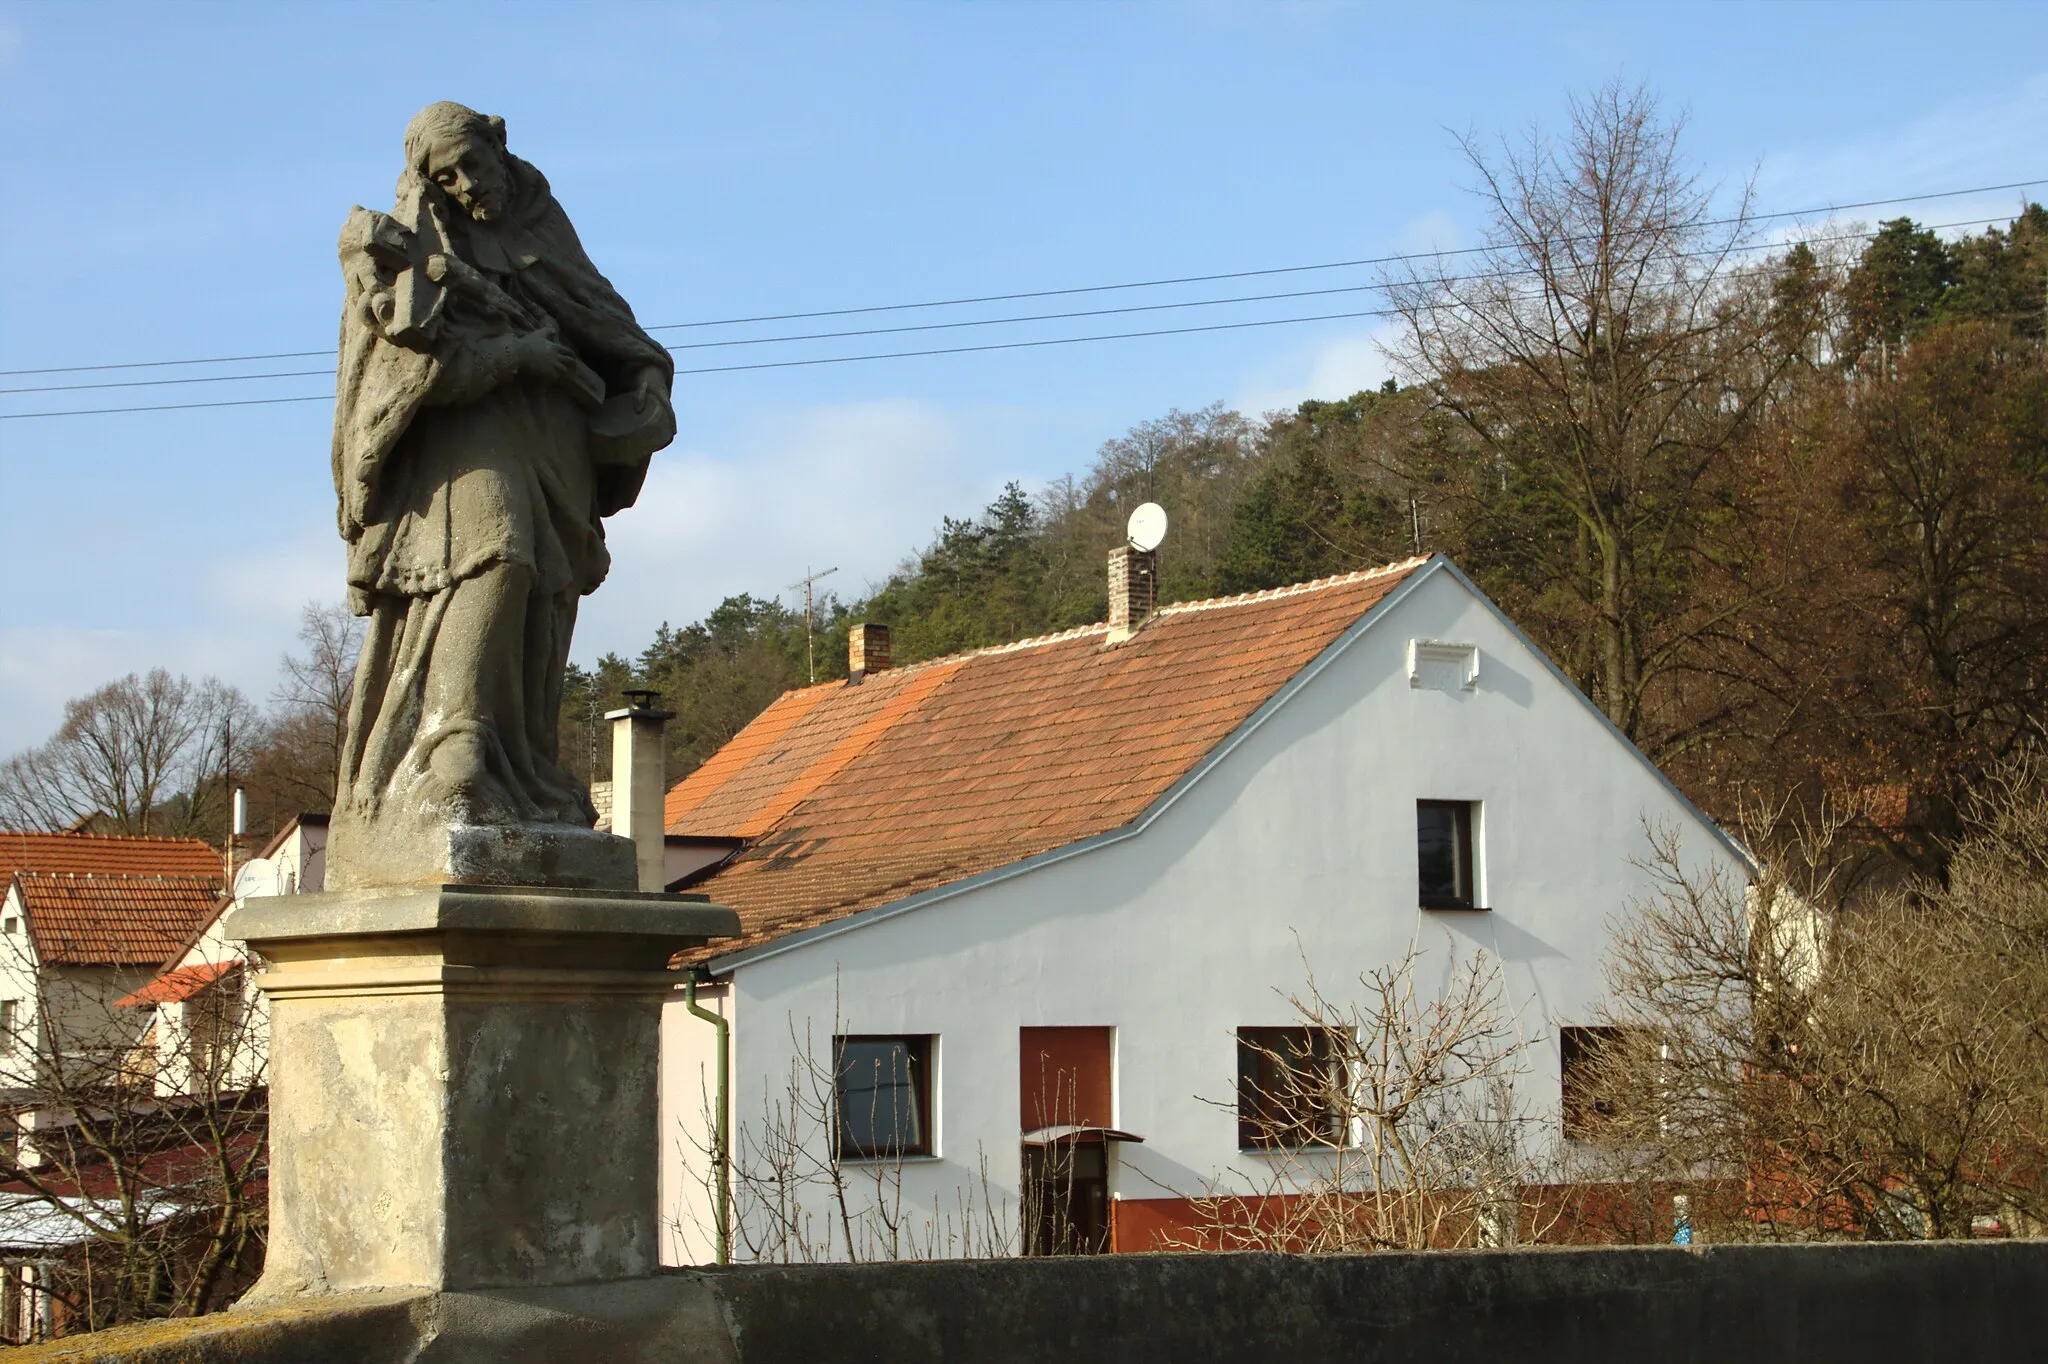 Photo showing: A statue on a bridge crossing some local creek in Sazená, a town in Kladno District, Central Bohemian Region, CZ